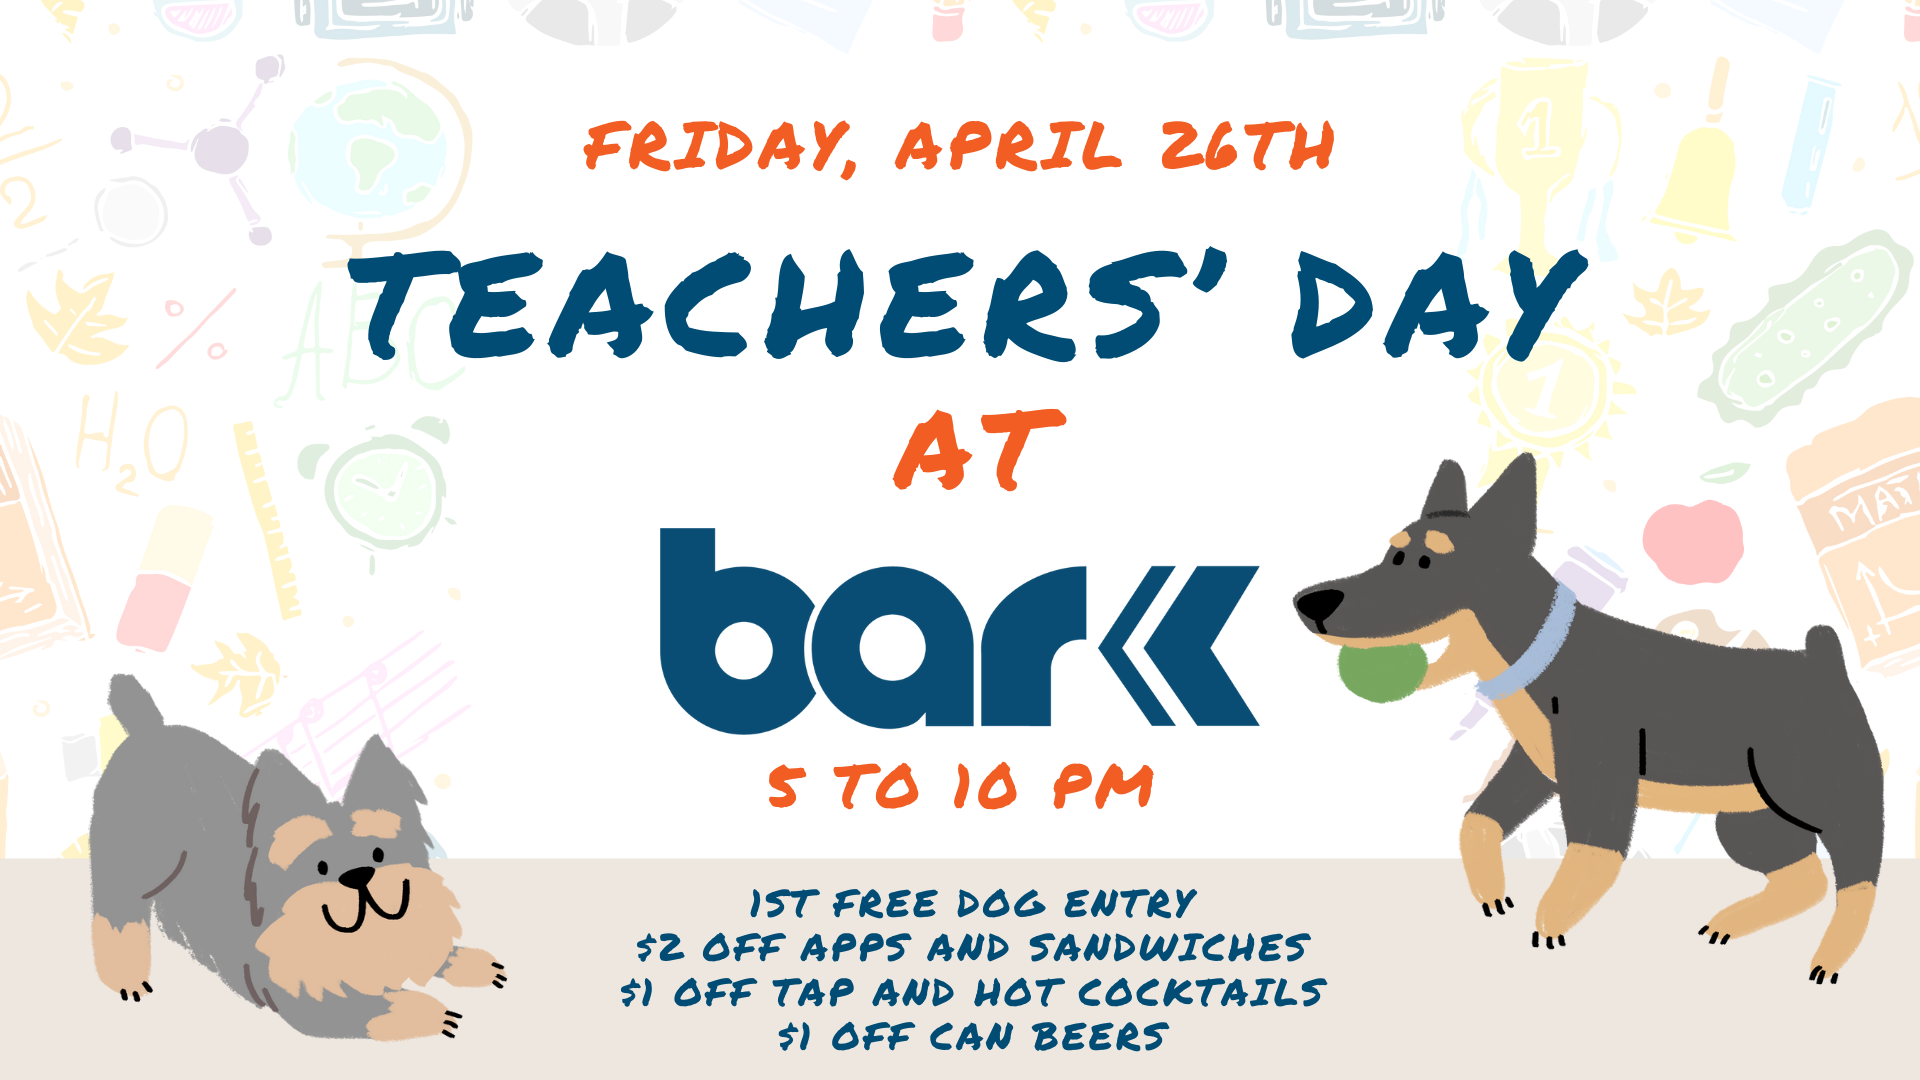 Friday, April 26th is Teachers' day at Bar K from 5 to 10pm. 1st free dog entry, $2 off apps and sandwiches, $1 off Tap and hot cocktails, $1 off can beers.